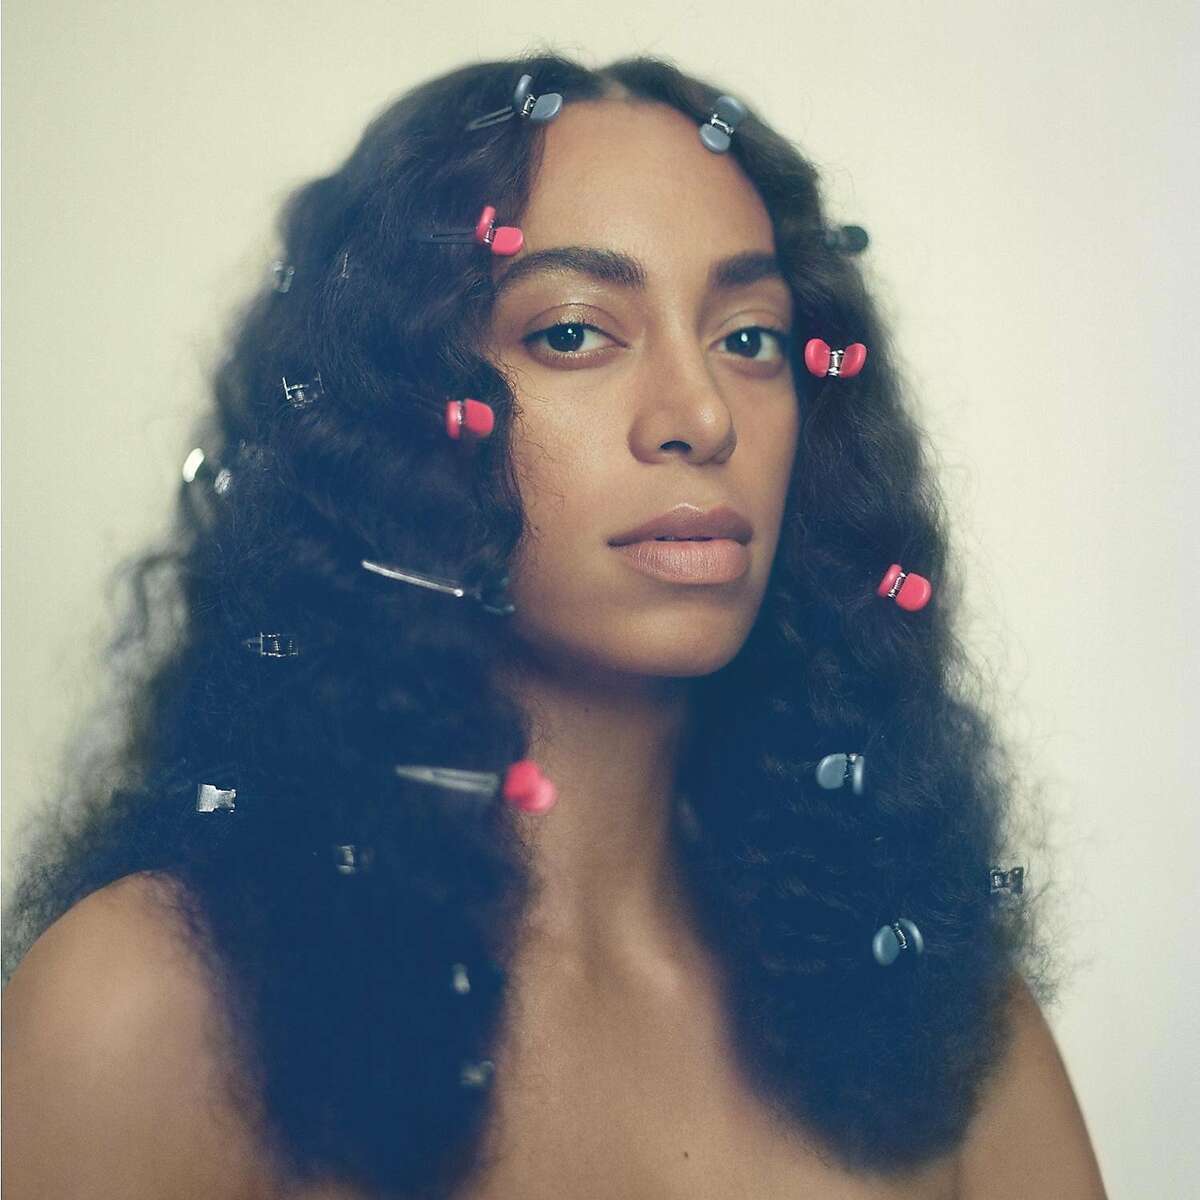 Album cover for A Seat at the Table from Solange.